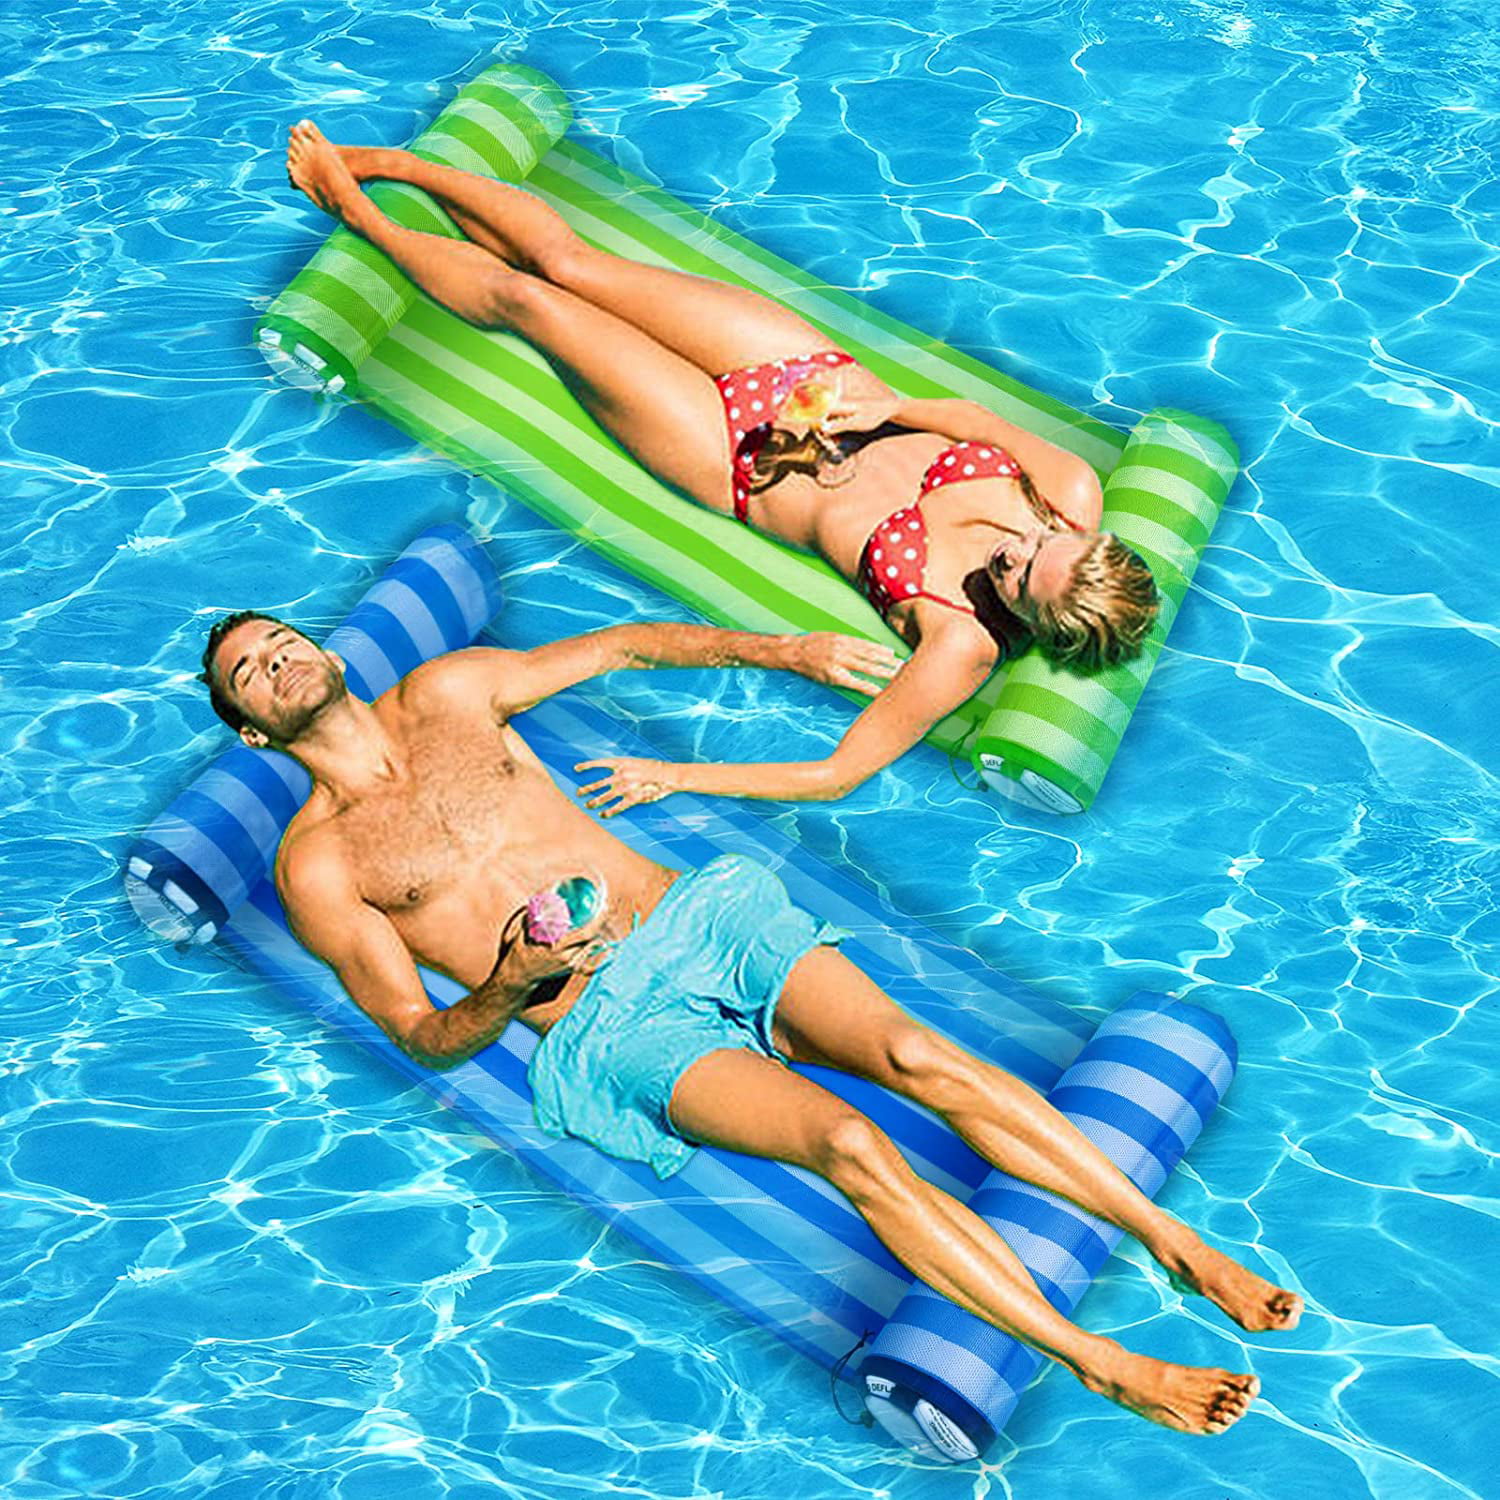 Pool Toys Accessories Chairs Saddle, Lounge Chair, Hammock, Drifter Portable Water Hammock Lounge 2 Pack Multi-Purpose Swimming Pool Hammock Inflatable Pool Floats Blue and Pink 